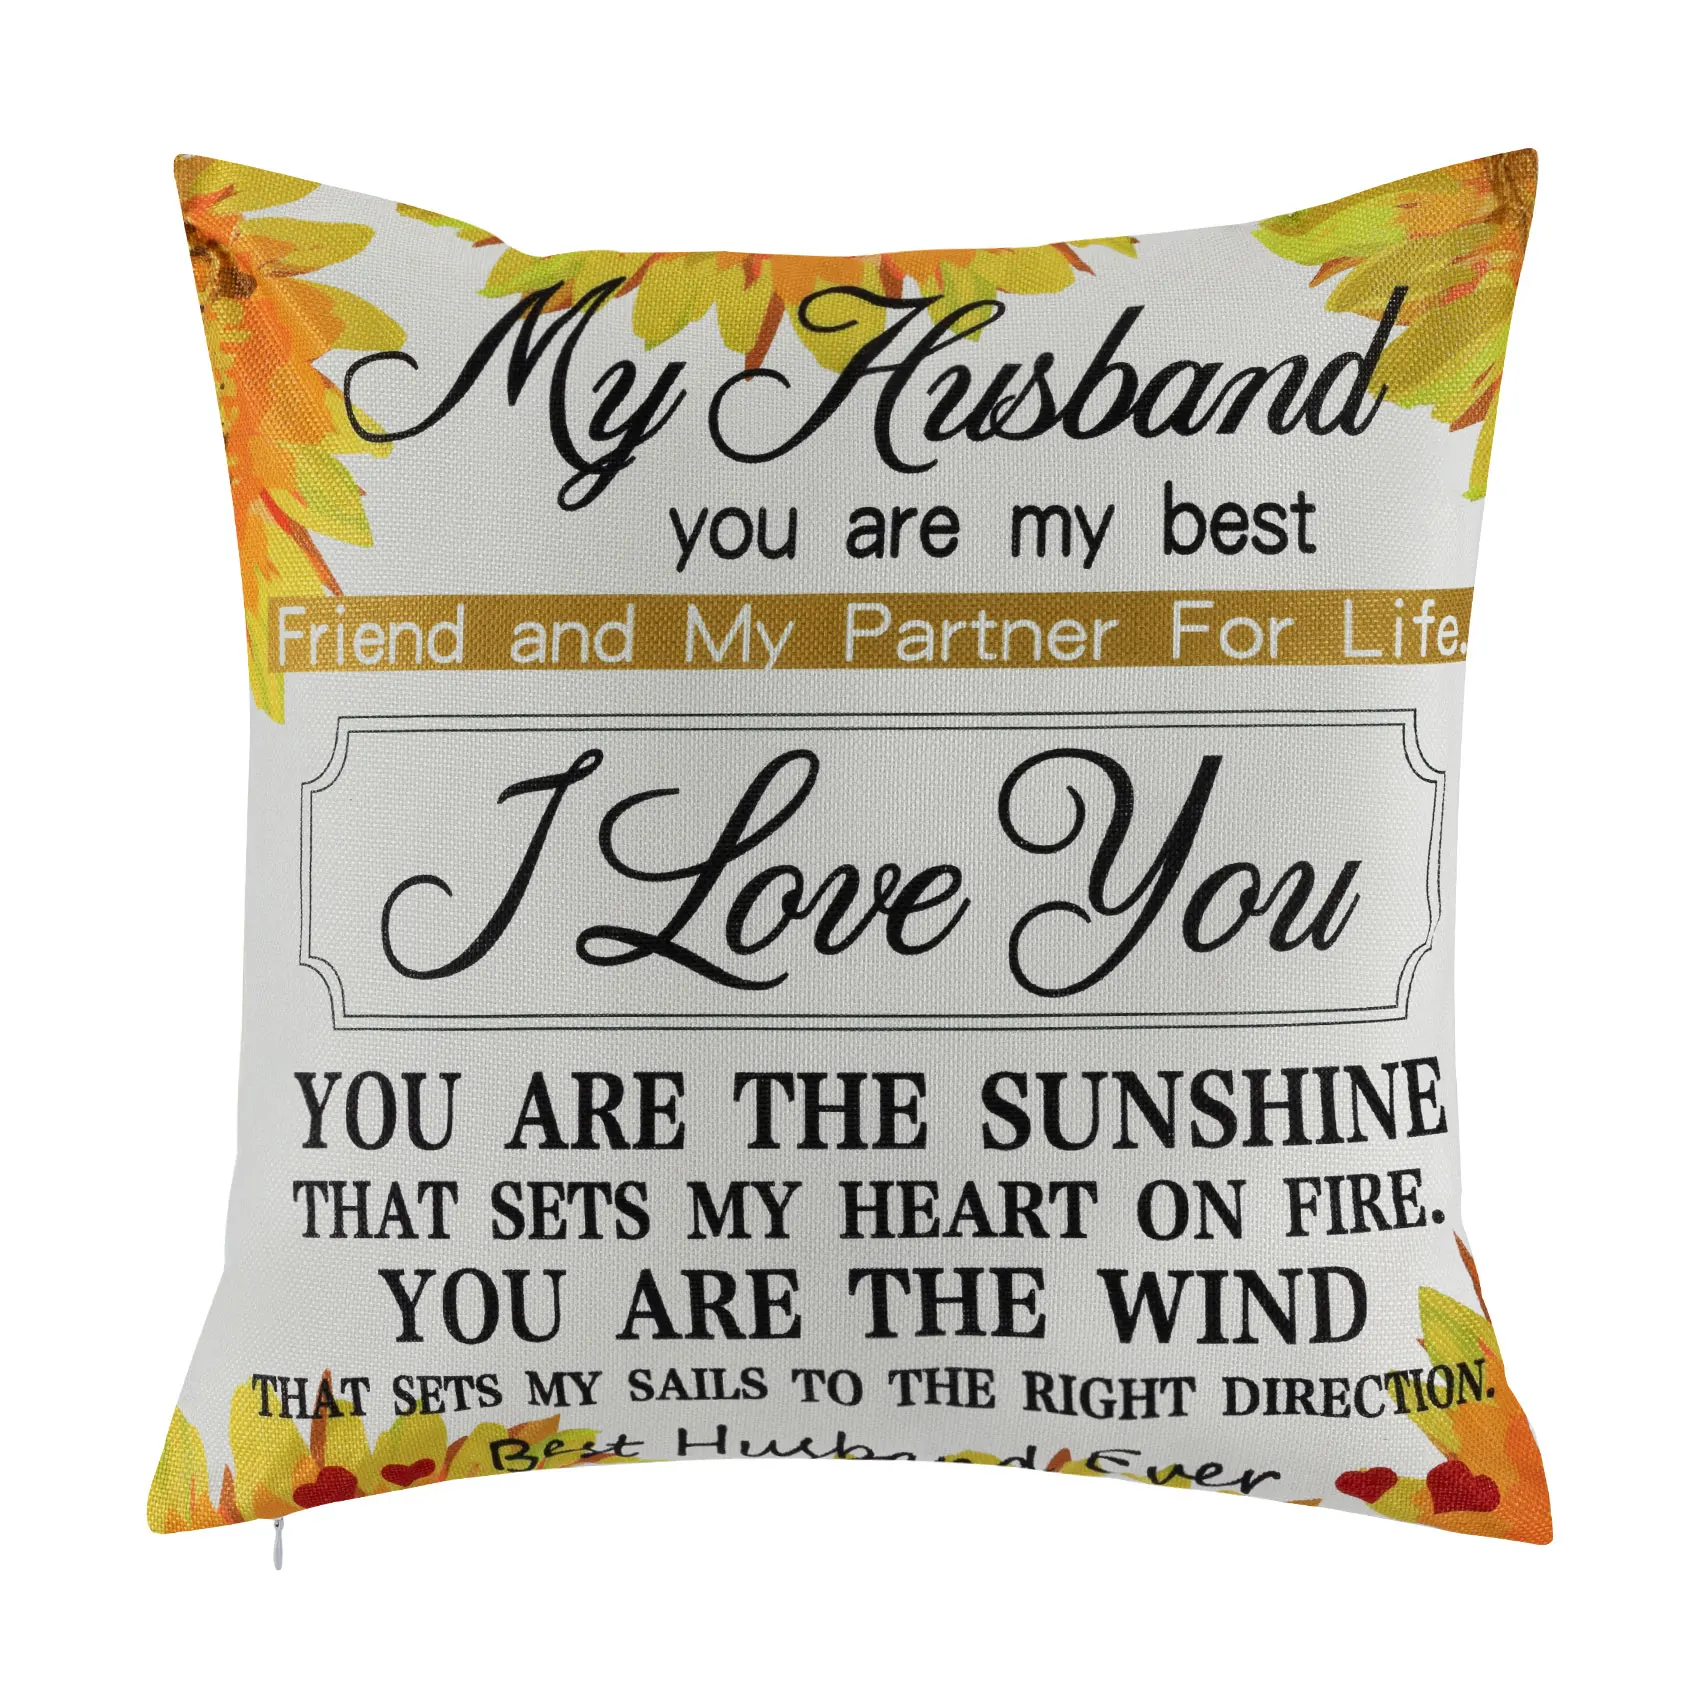 

Husband Gifts From Wife Cushion Cover Valentine'S Day Romantic For Him Sunflower Present Pillow Case For Bed Or Sofa